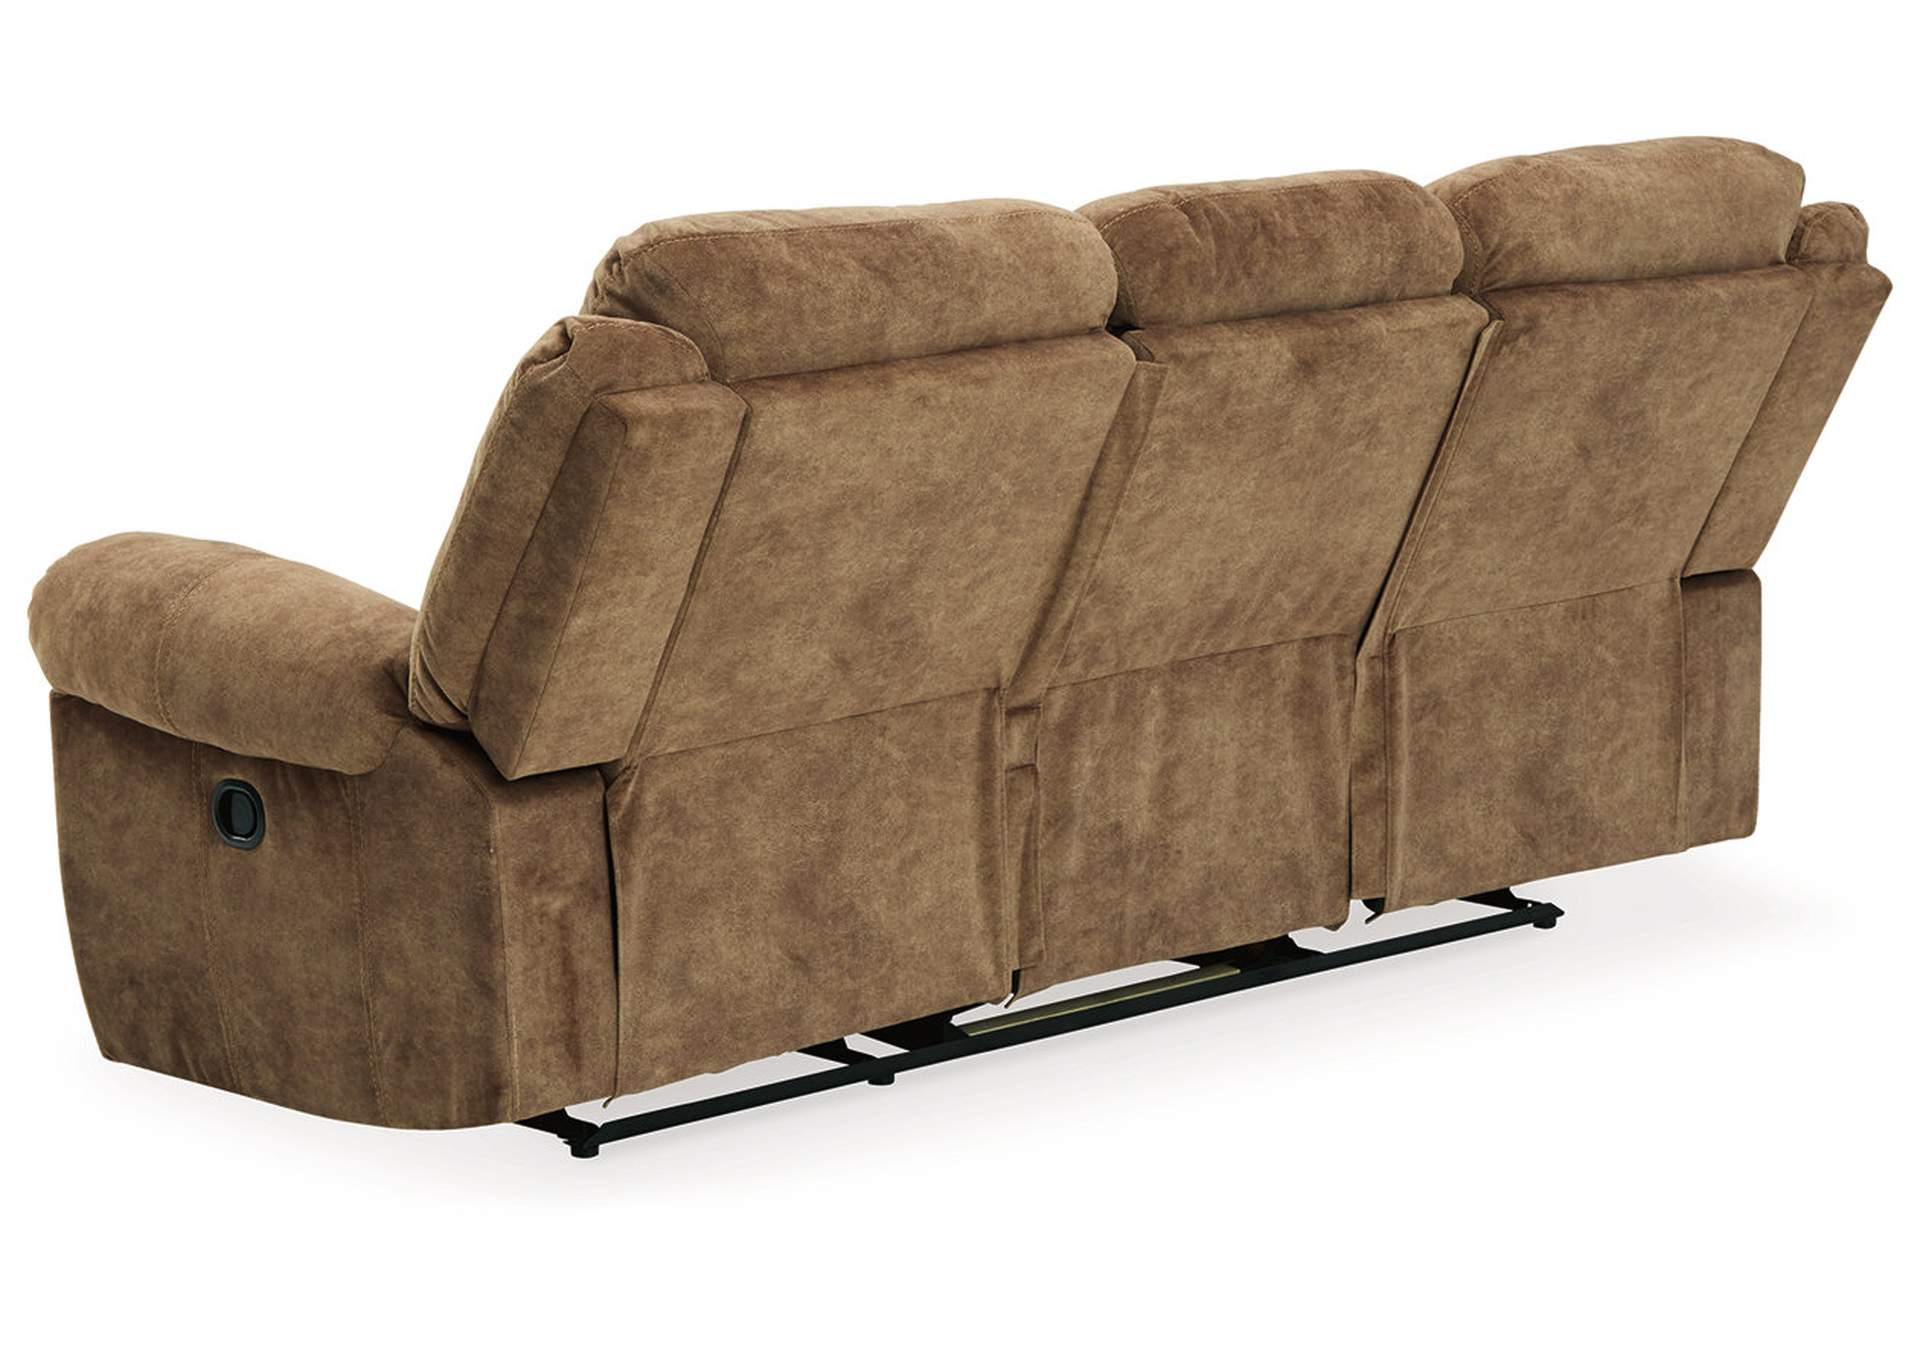 Huddle-Up Reclining Sofa with Drop Down Table,Signature Design By Ashley